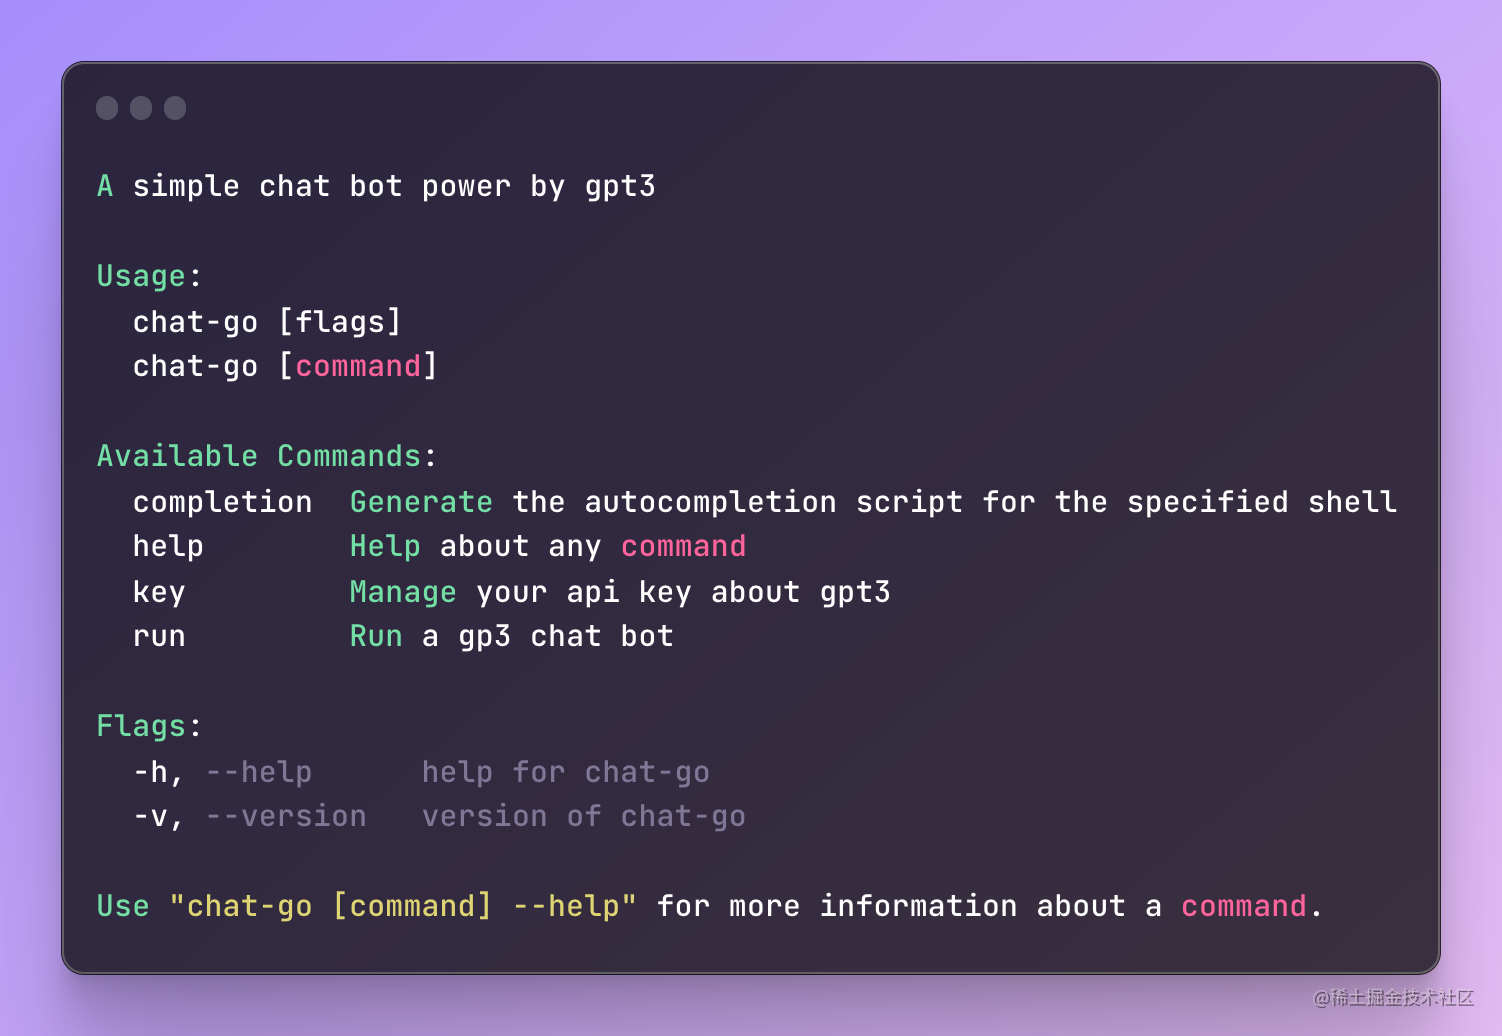 CLI ChatBot Power By Gpt3